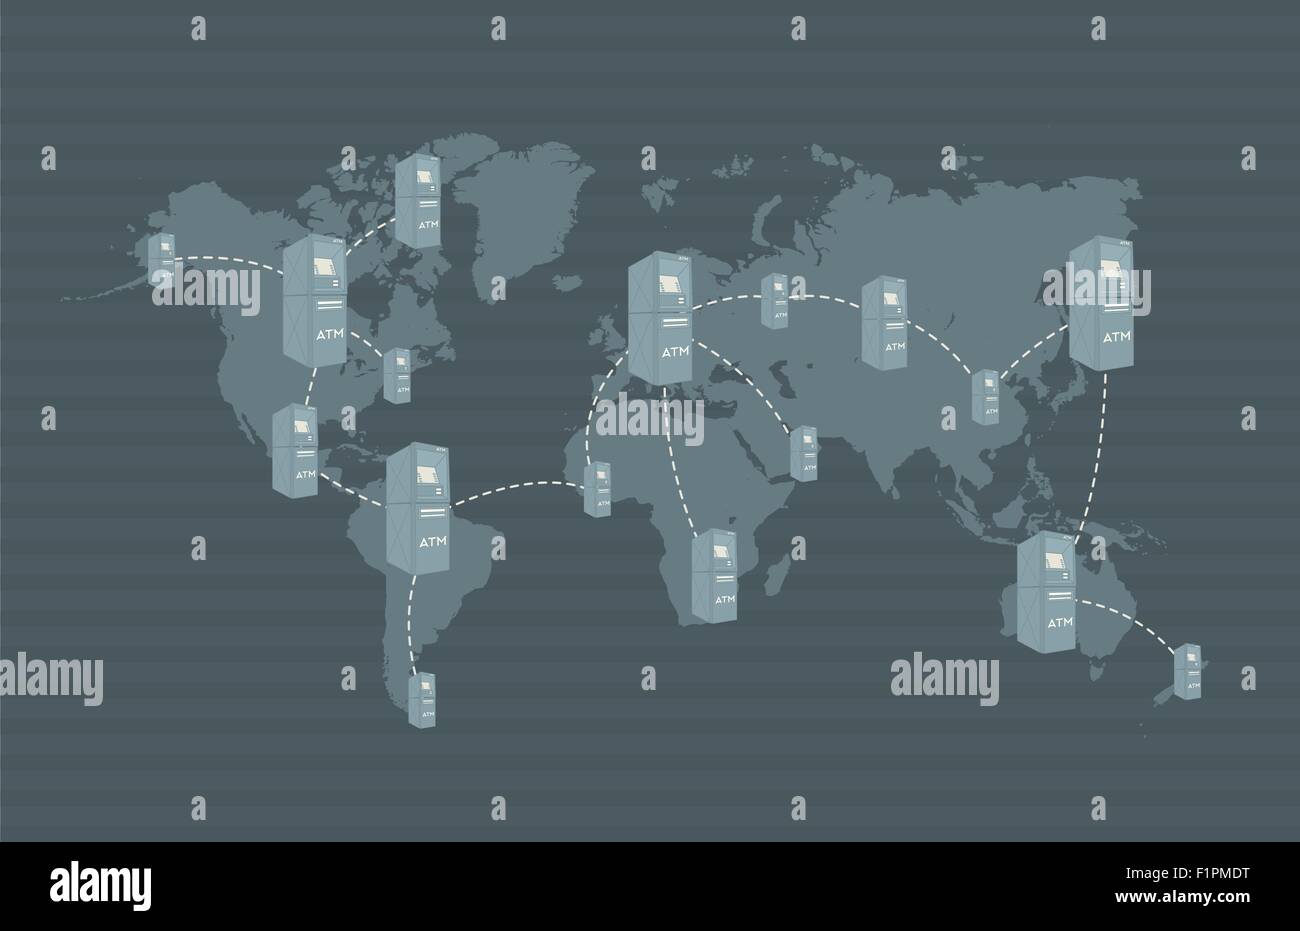 ATM network on world map Concept is showing that you can use your credit/debit card all over the world Stock Vector